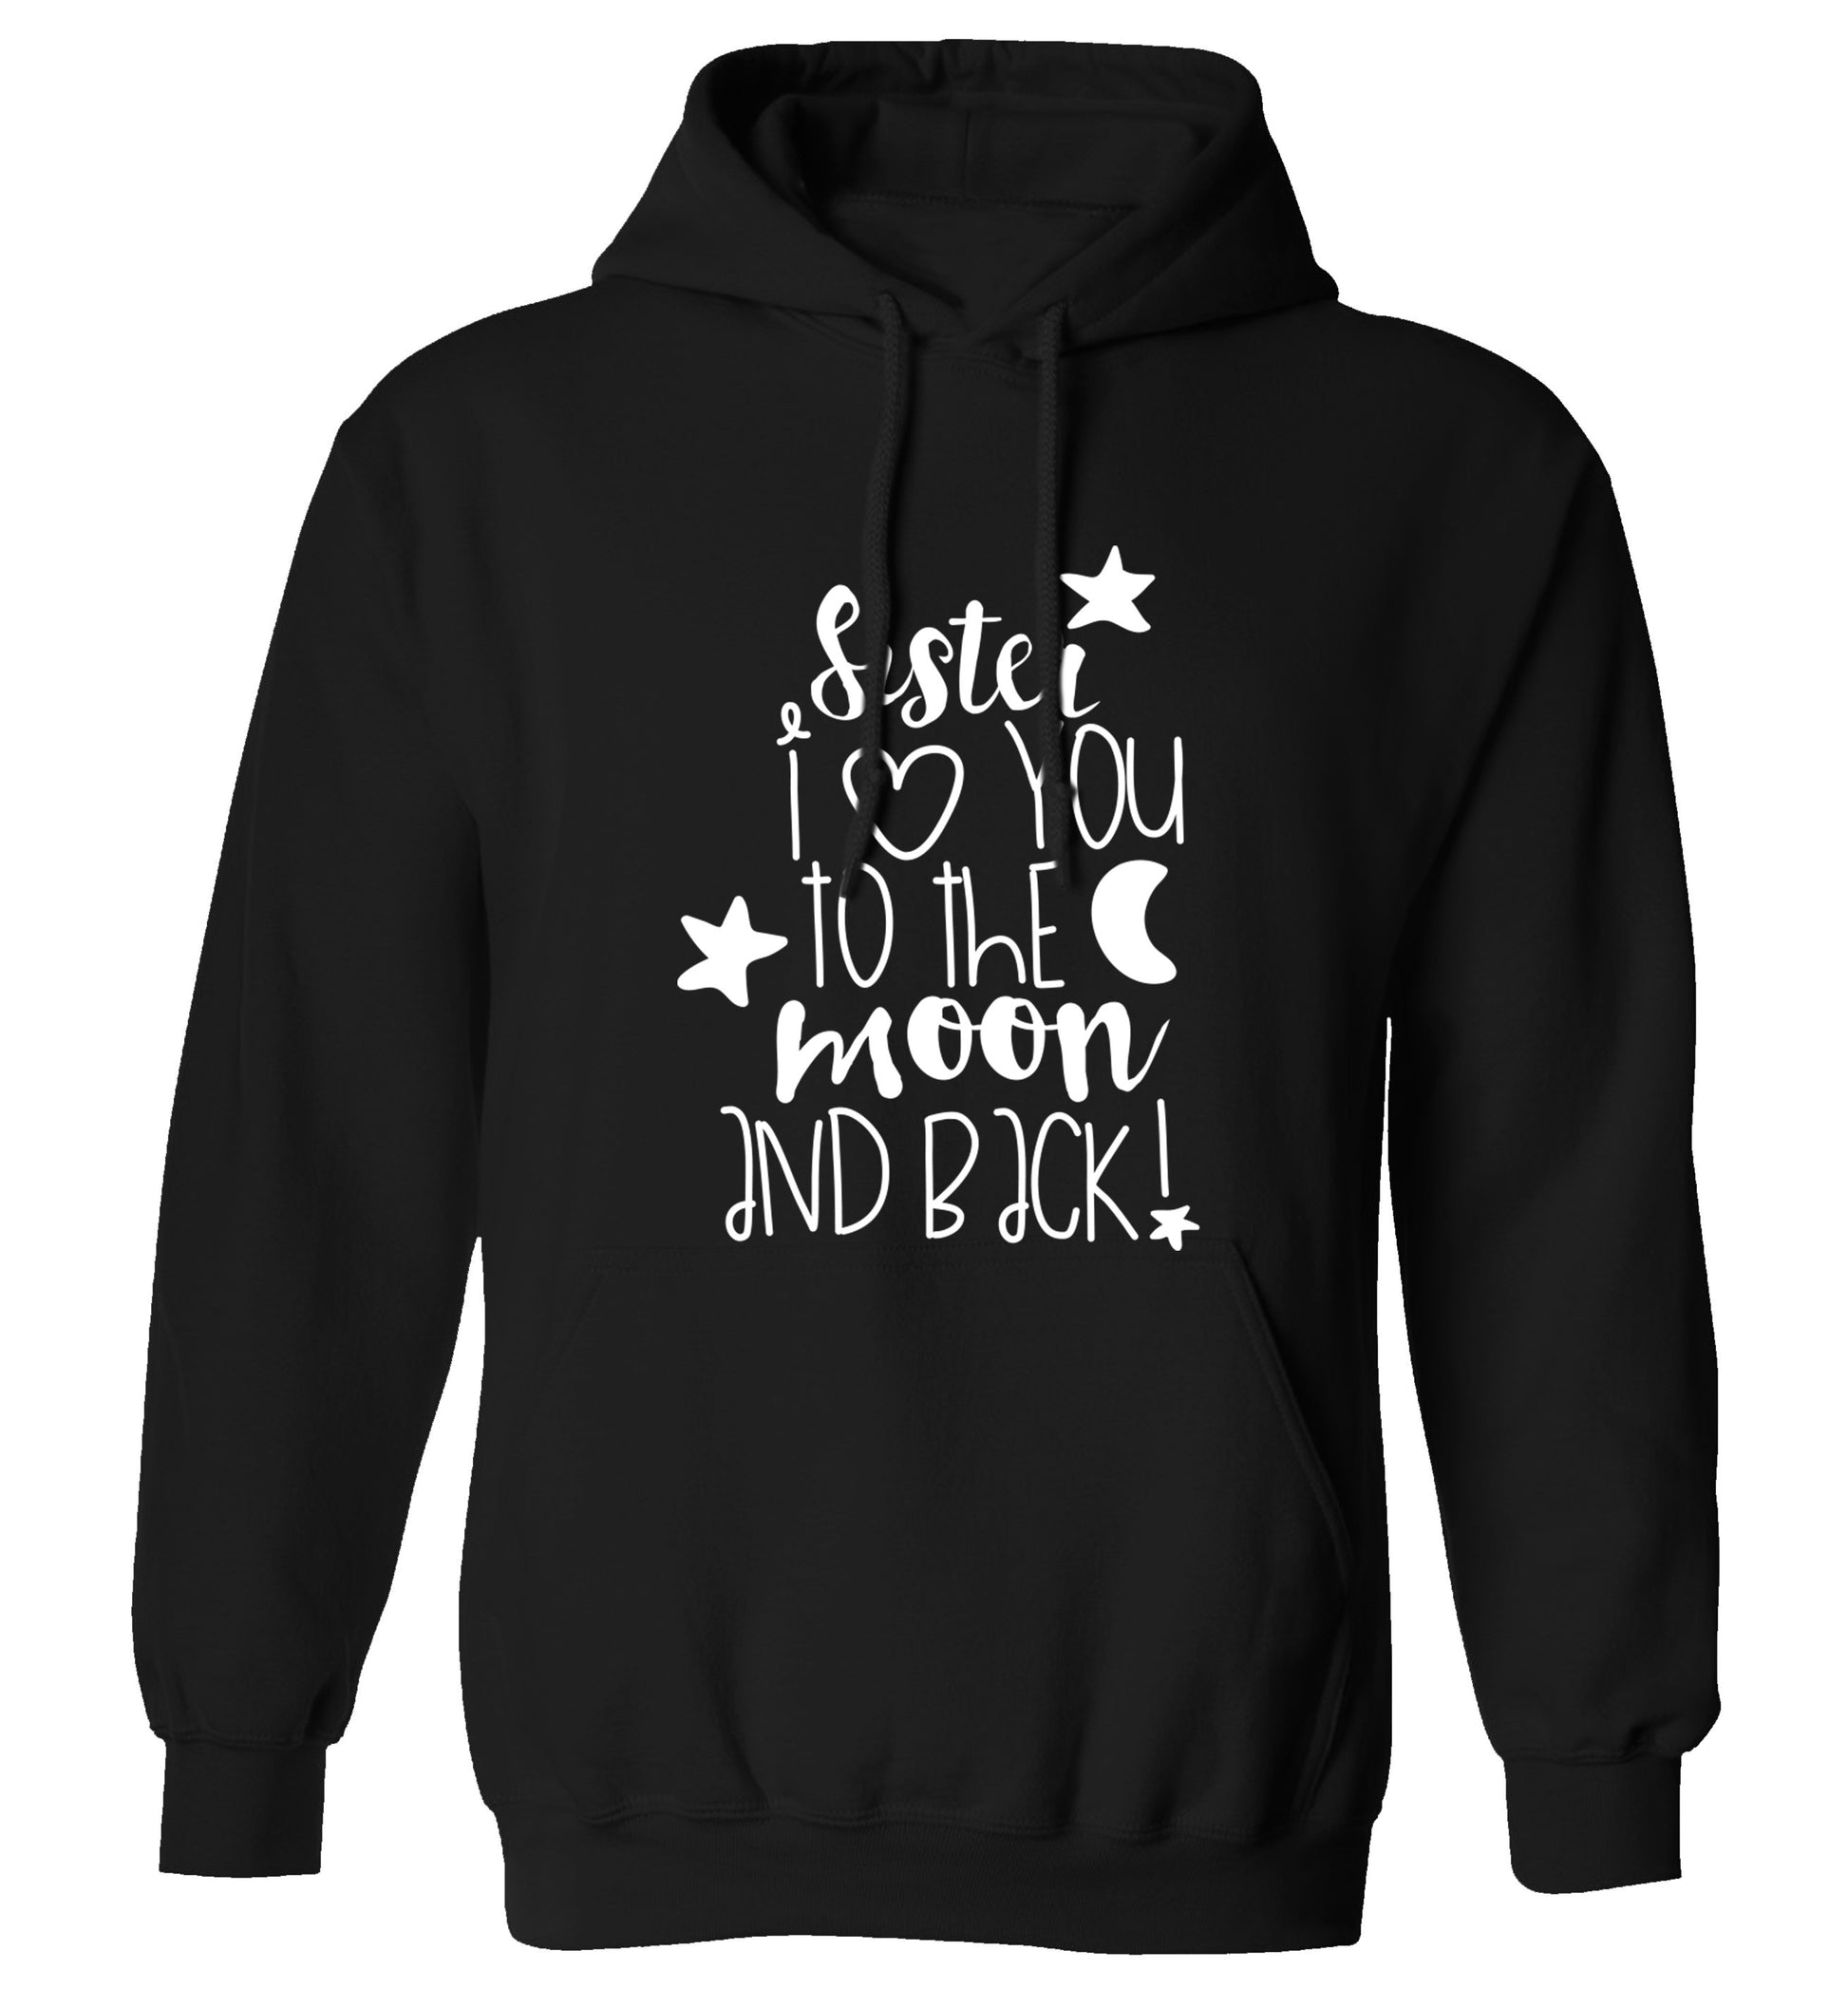 Sister I love you to the moon and back adults unisex black hoodie 2XL